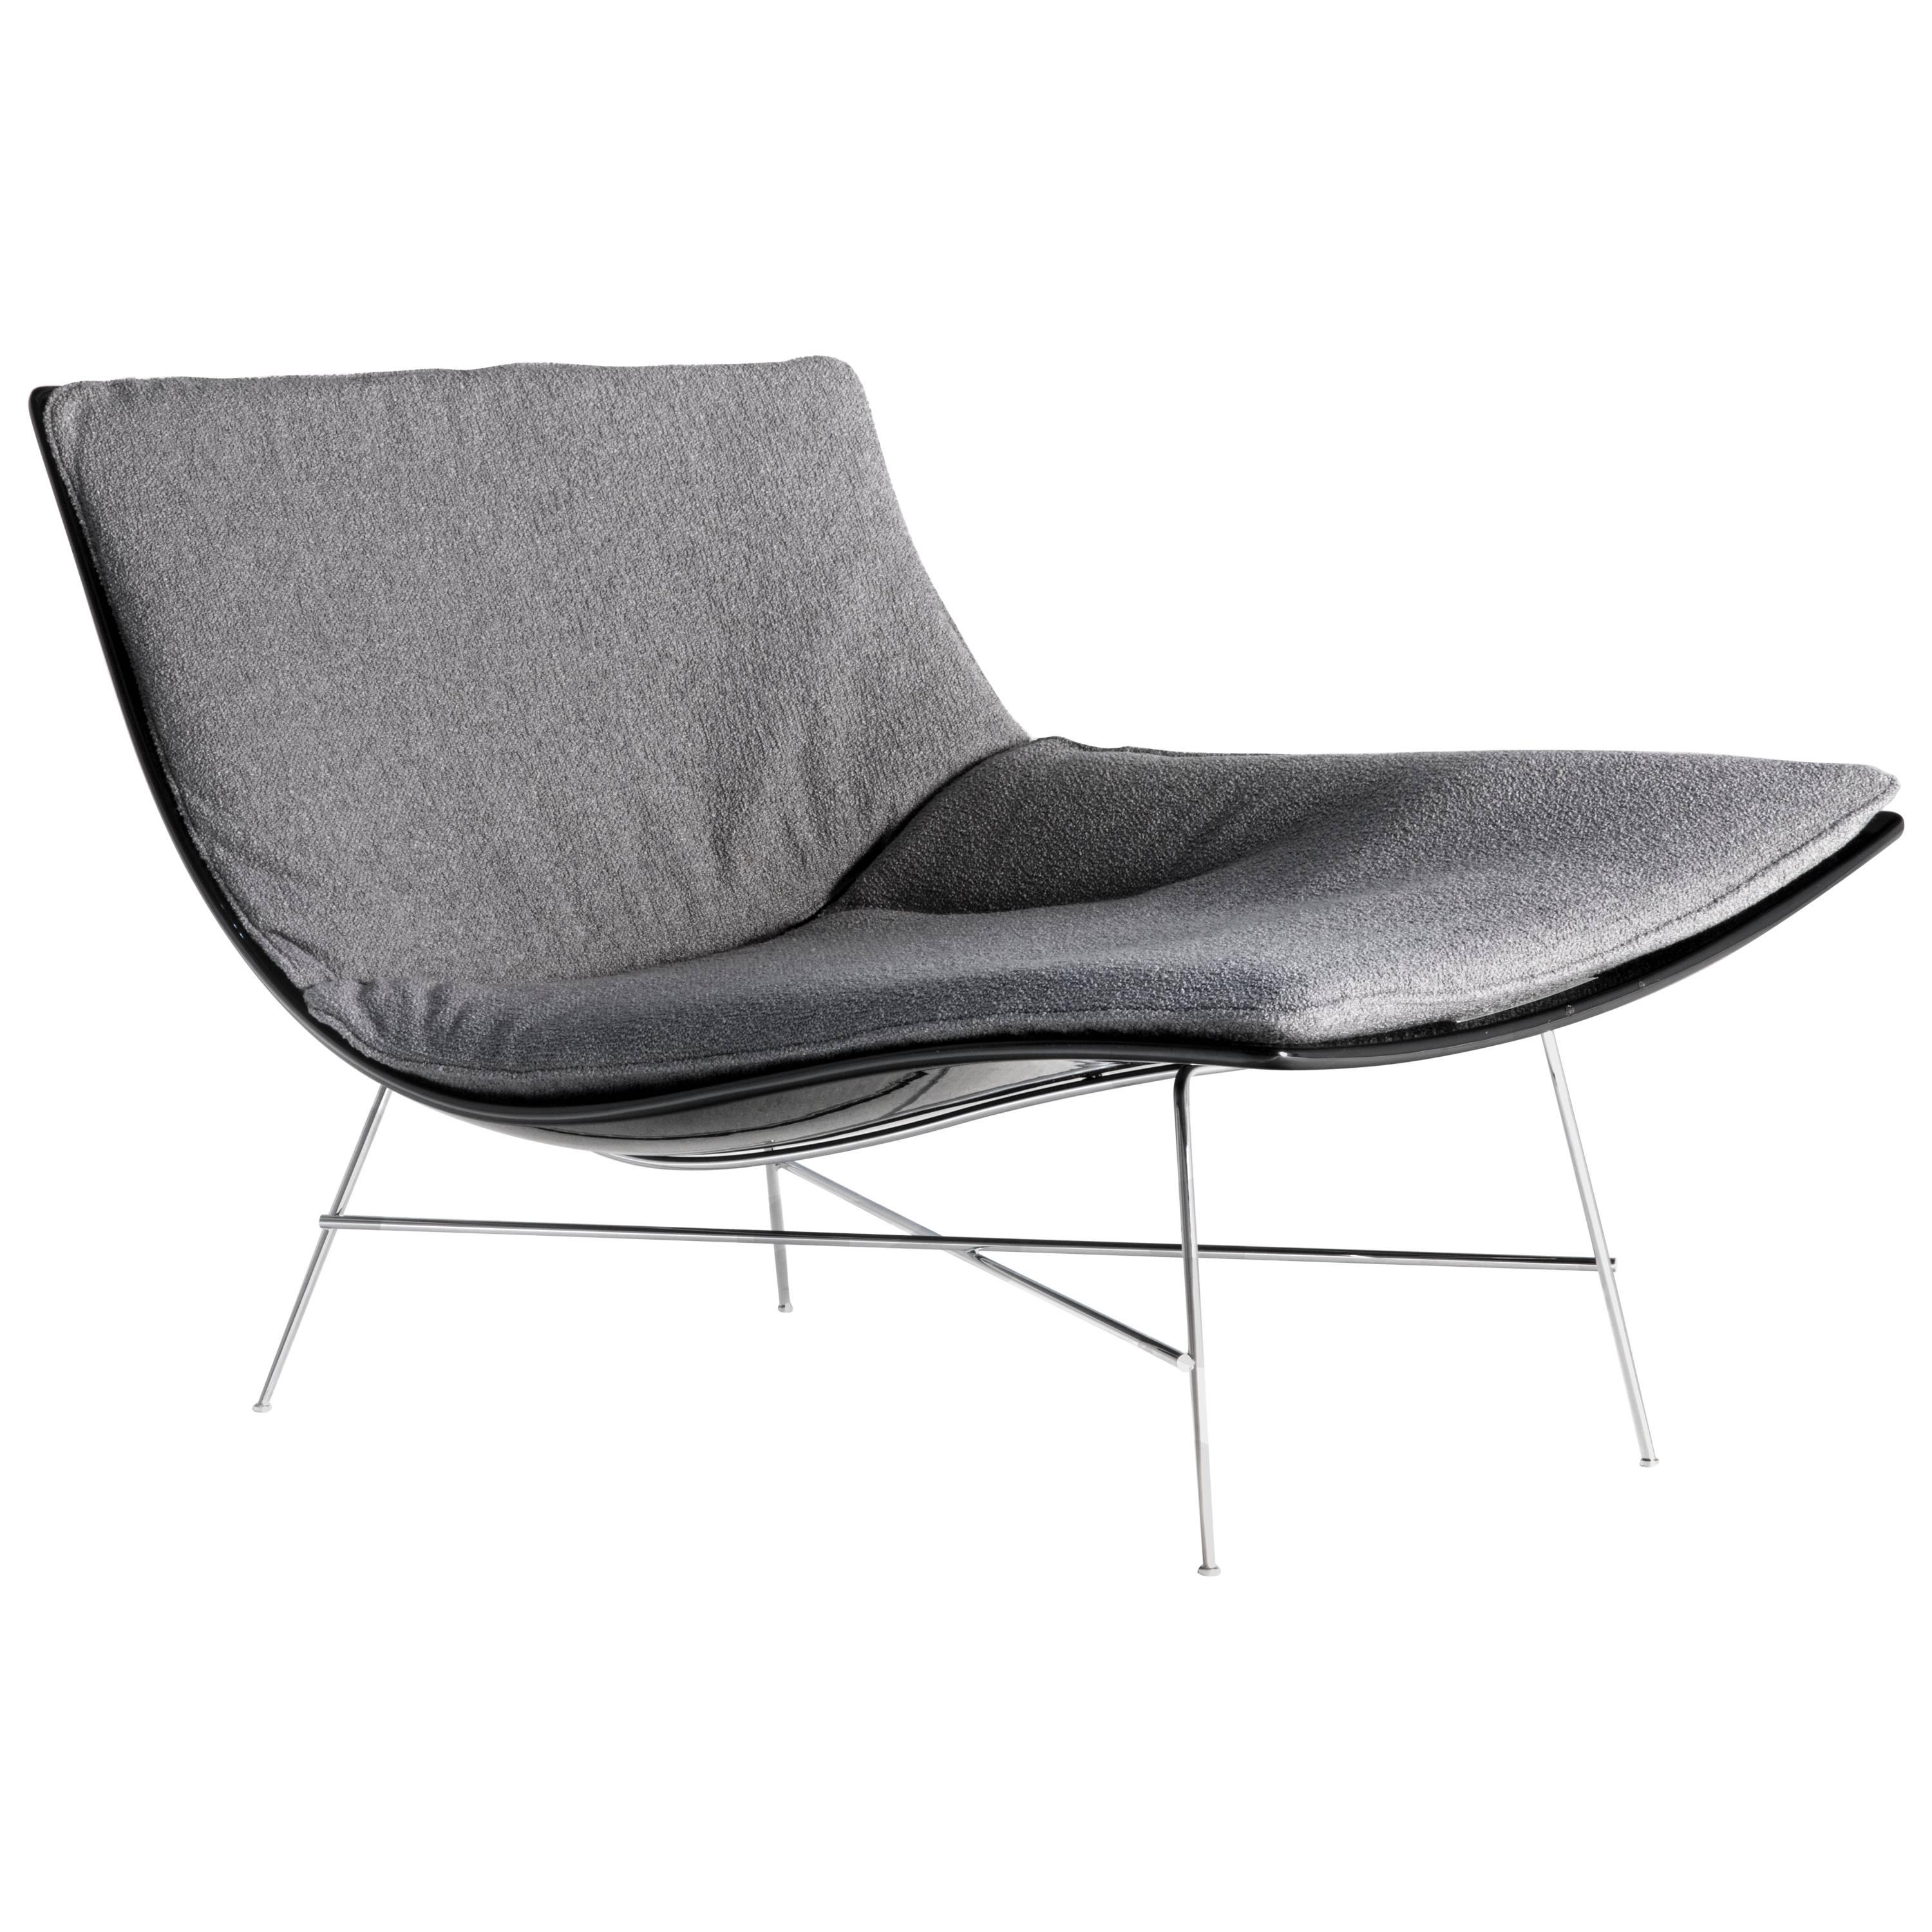 Full Moon Chair in Grey with Black Lacquered Shell by Ludovica & Roberto Palomba For Sale